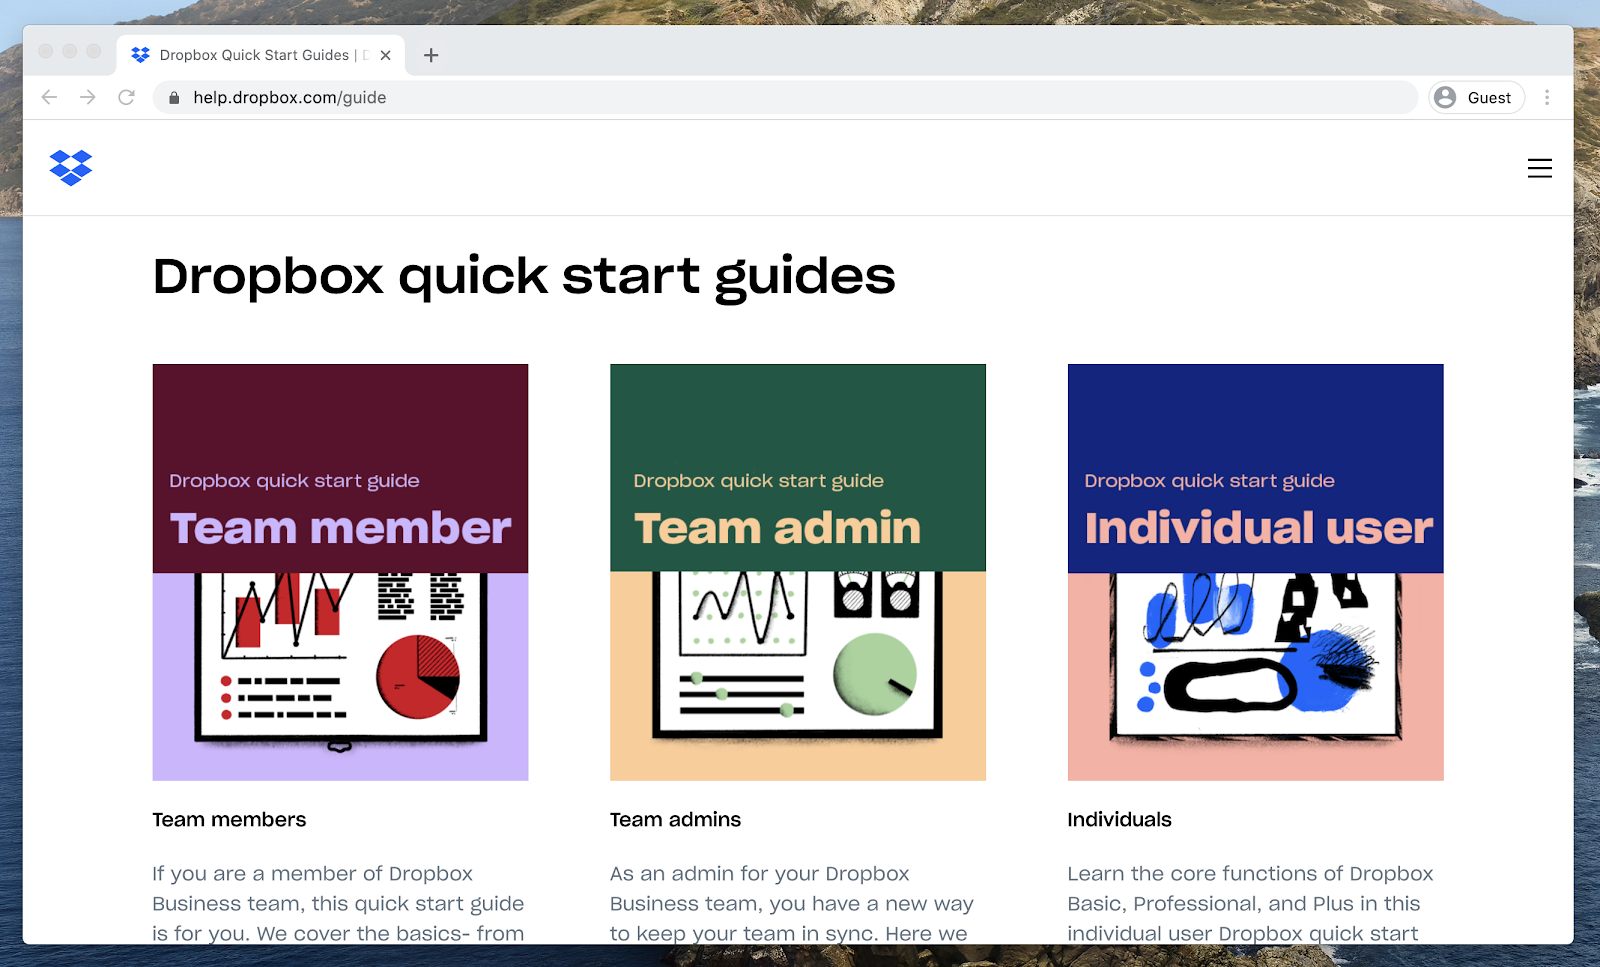 Dropbox utilizes contrast in their quick start layout by changing the background color to have an equal amount of contrast between each title.